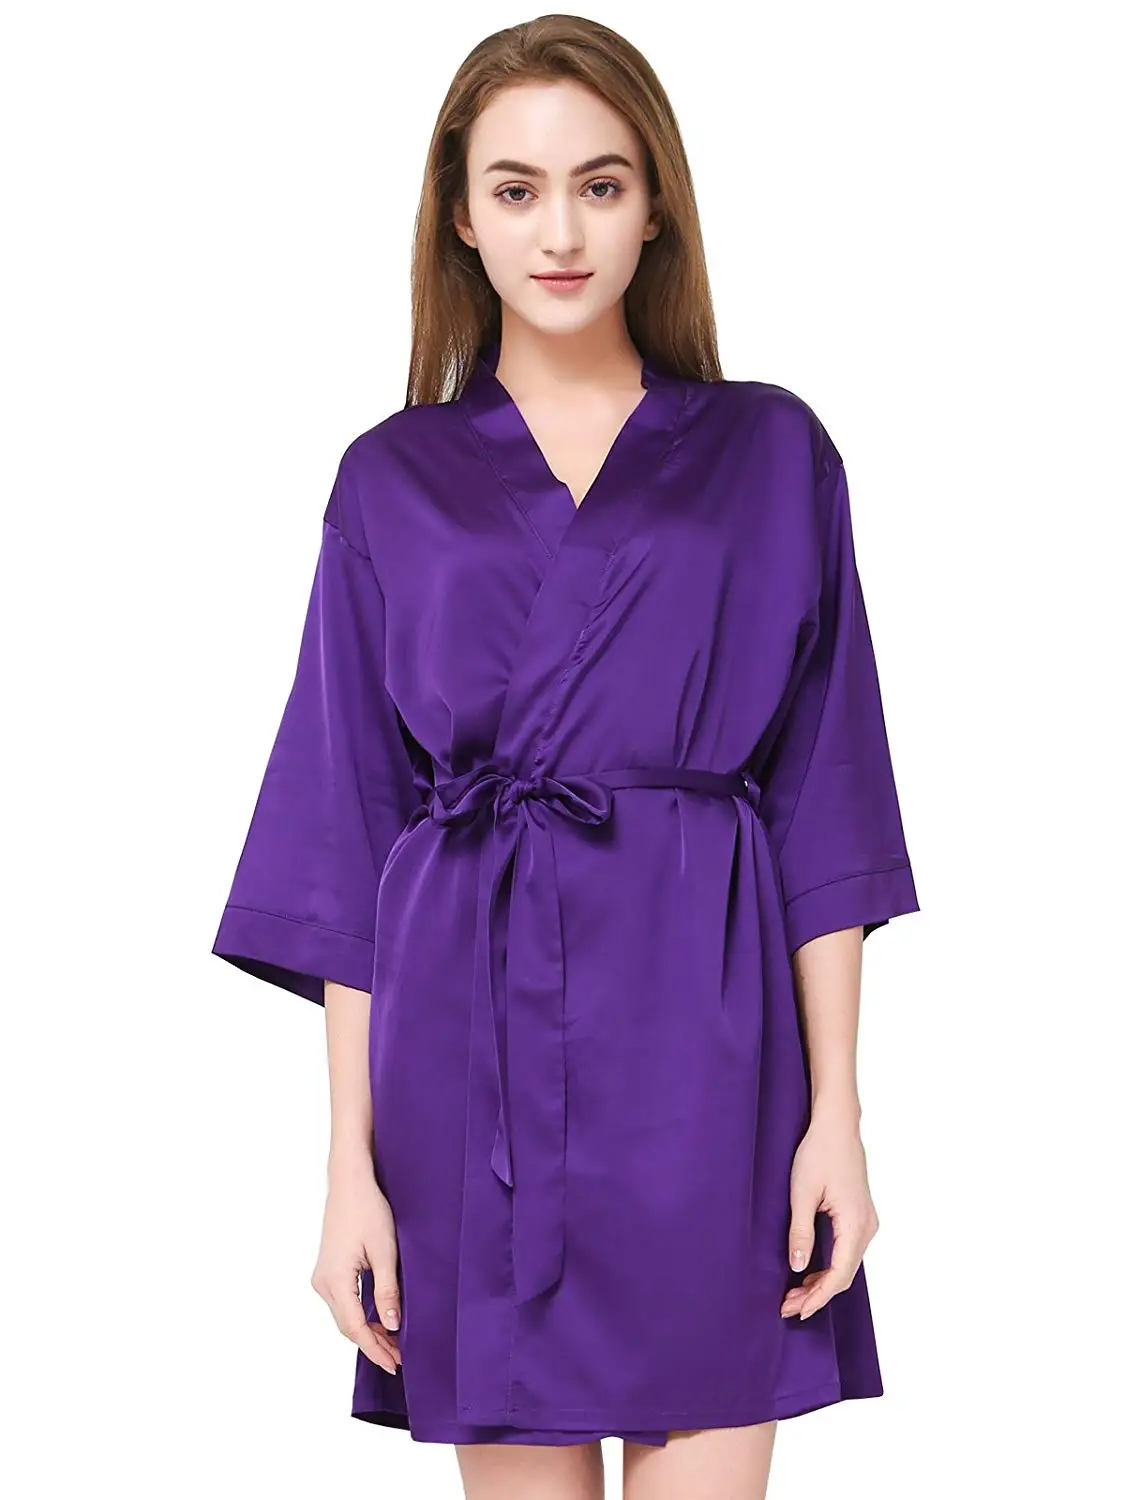 Cheap Robe Dressing Gown, find Robe Dressing Gown deals on line at ...